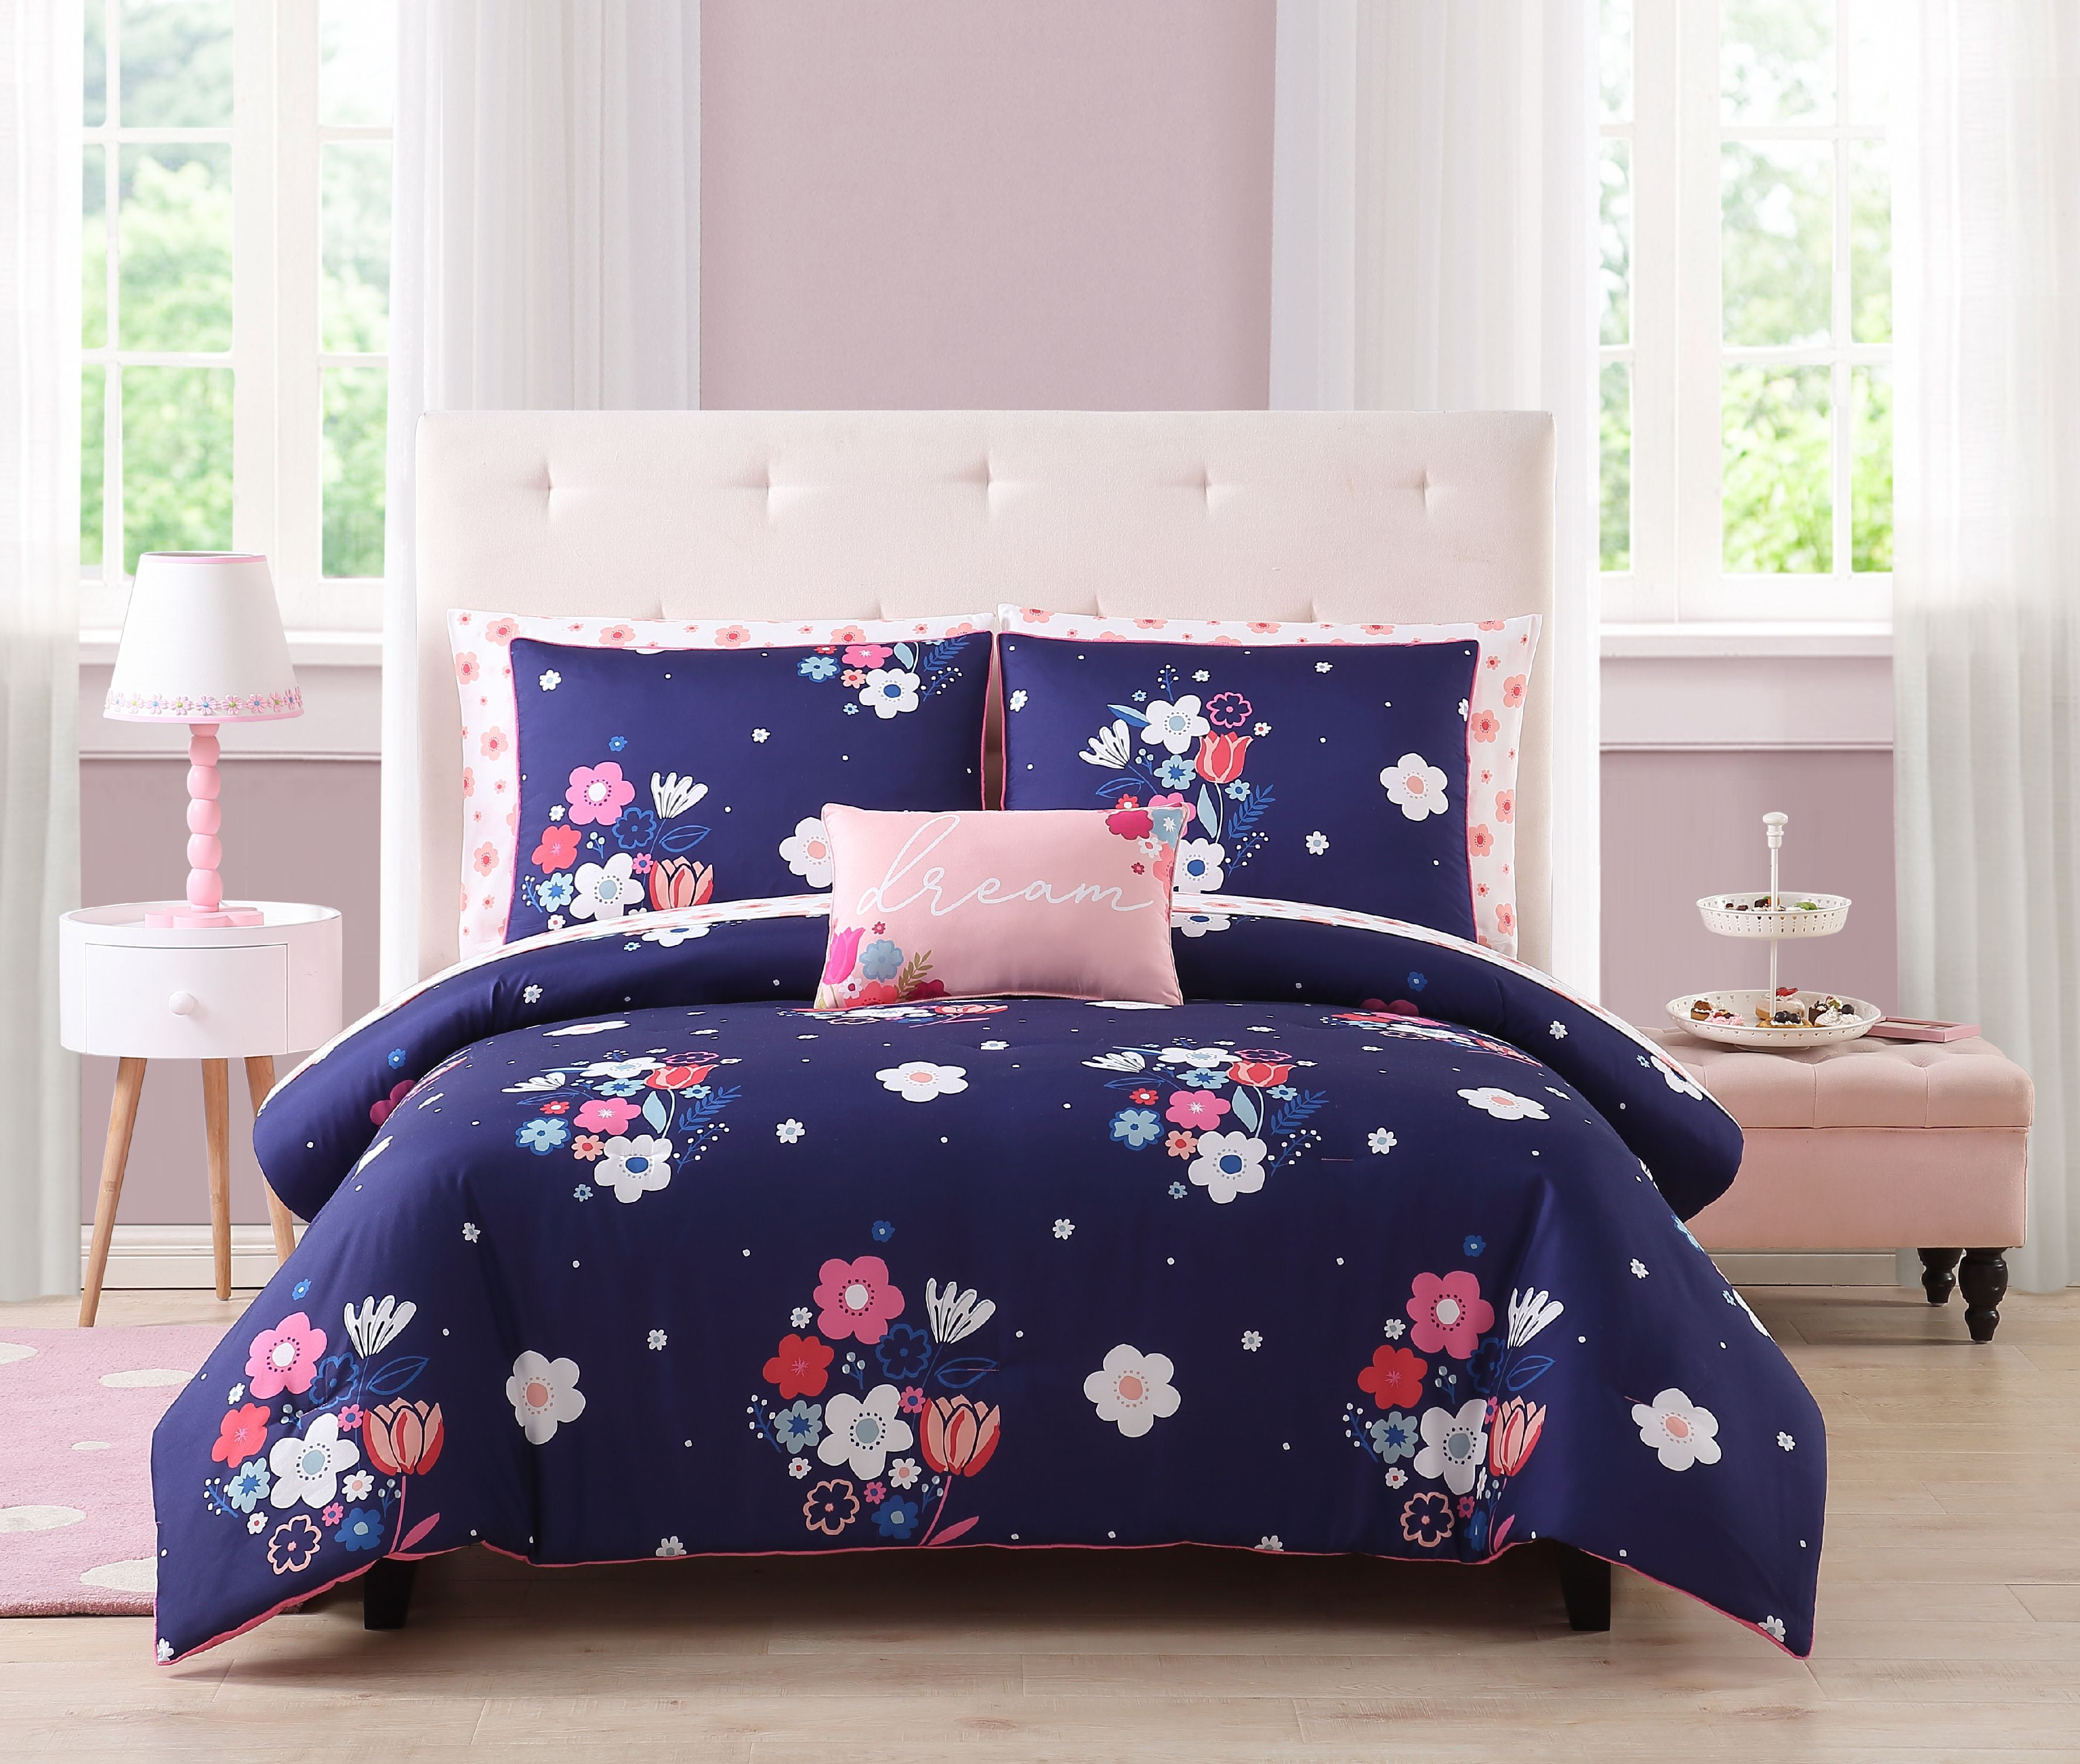 Twin Formula Multi-Floral Reversible Bed in a Bag Bedding Set 5 Pieces 